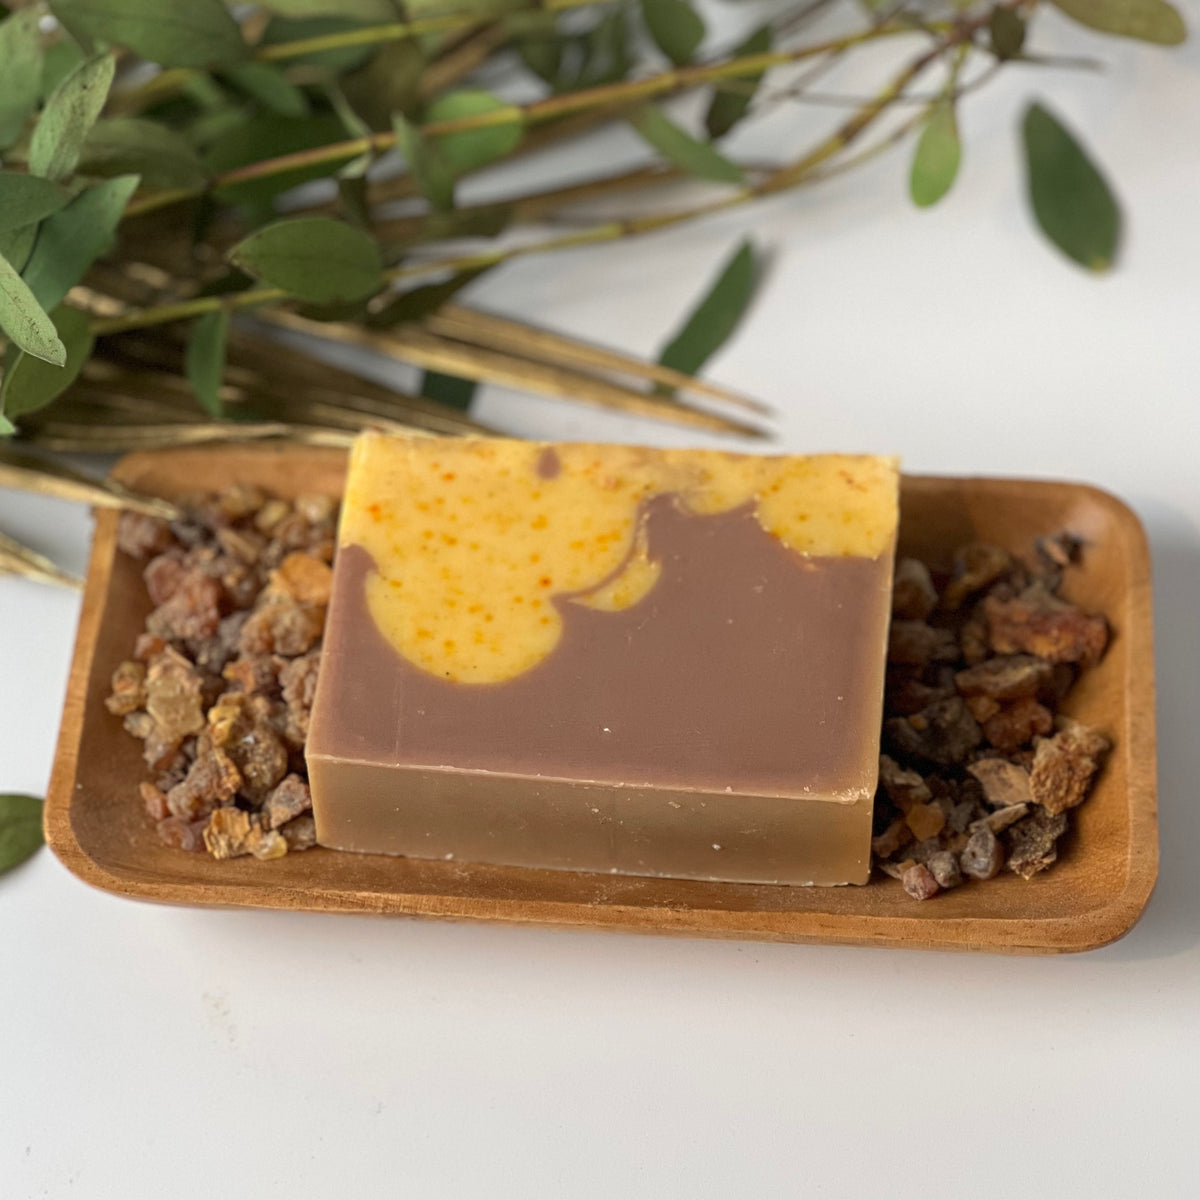 Traverse Bay Bath and Body- All natural handmade cold process bar soap,  Frankincense and myrrh with